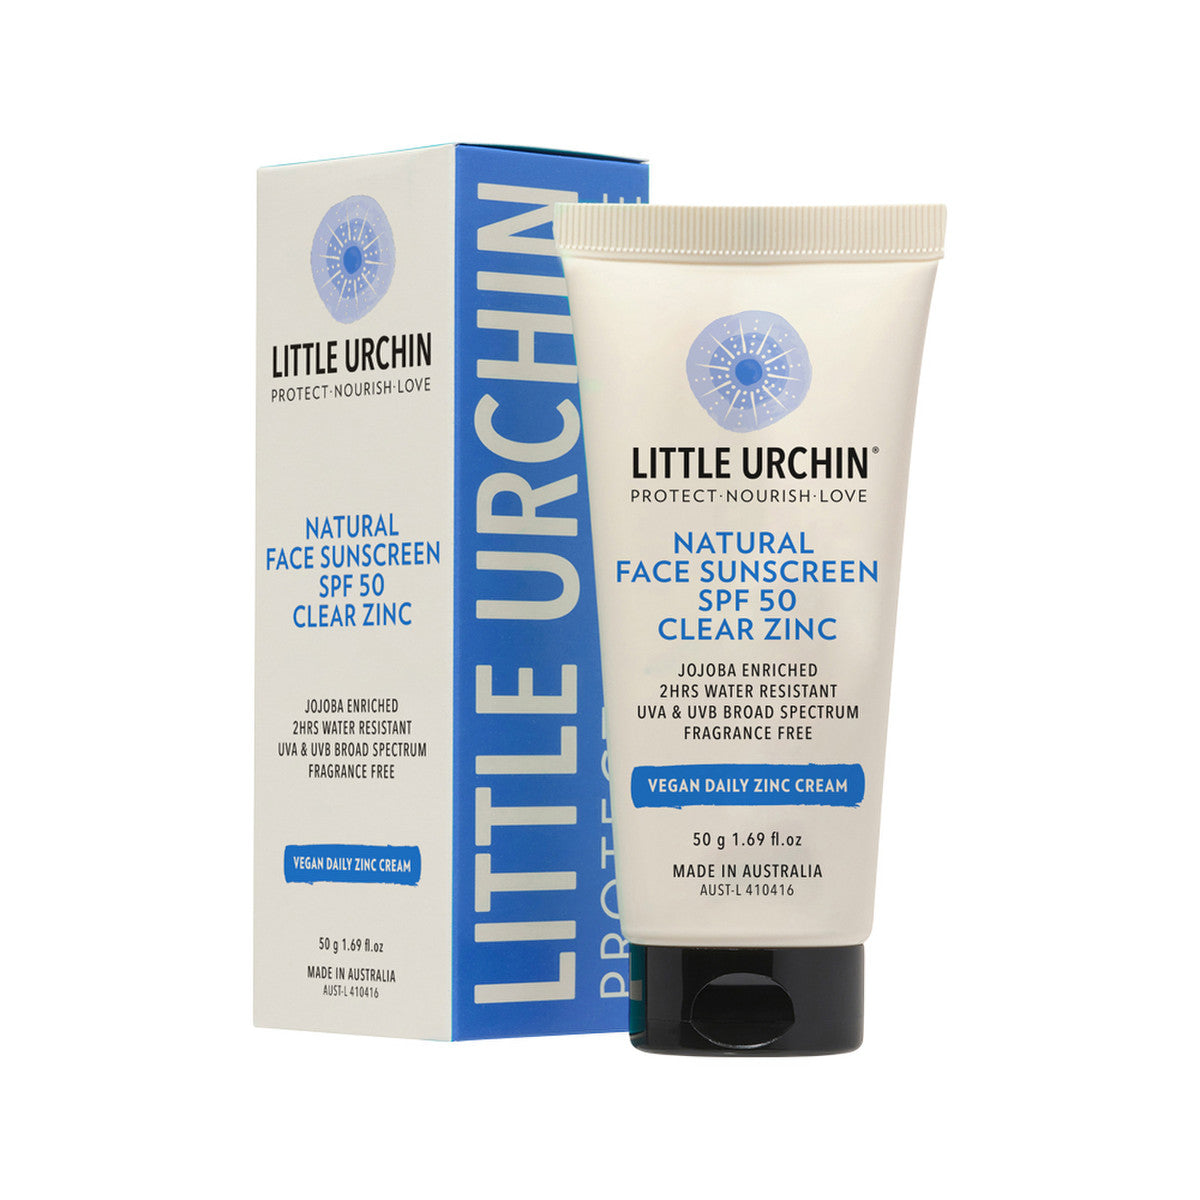 Little Urchin Natural Clear Zinc Face Sunscreen SPF 50+ 50g, 2 Hours Water Resistant  & Fragrance Free